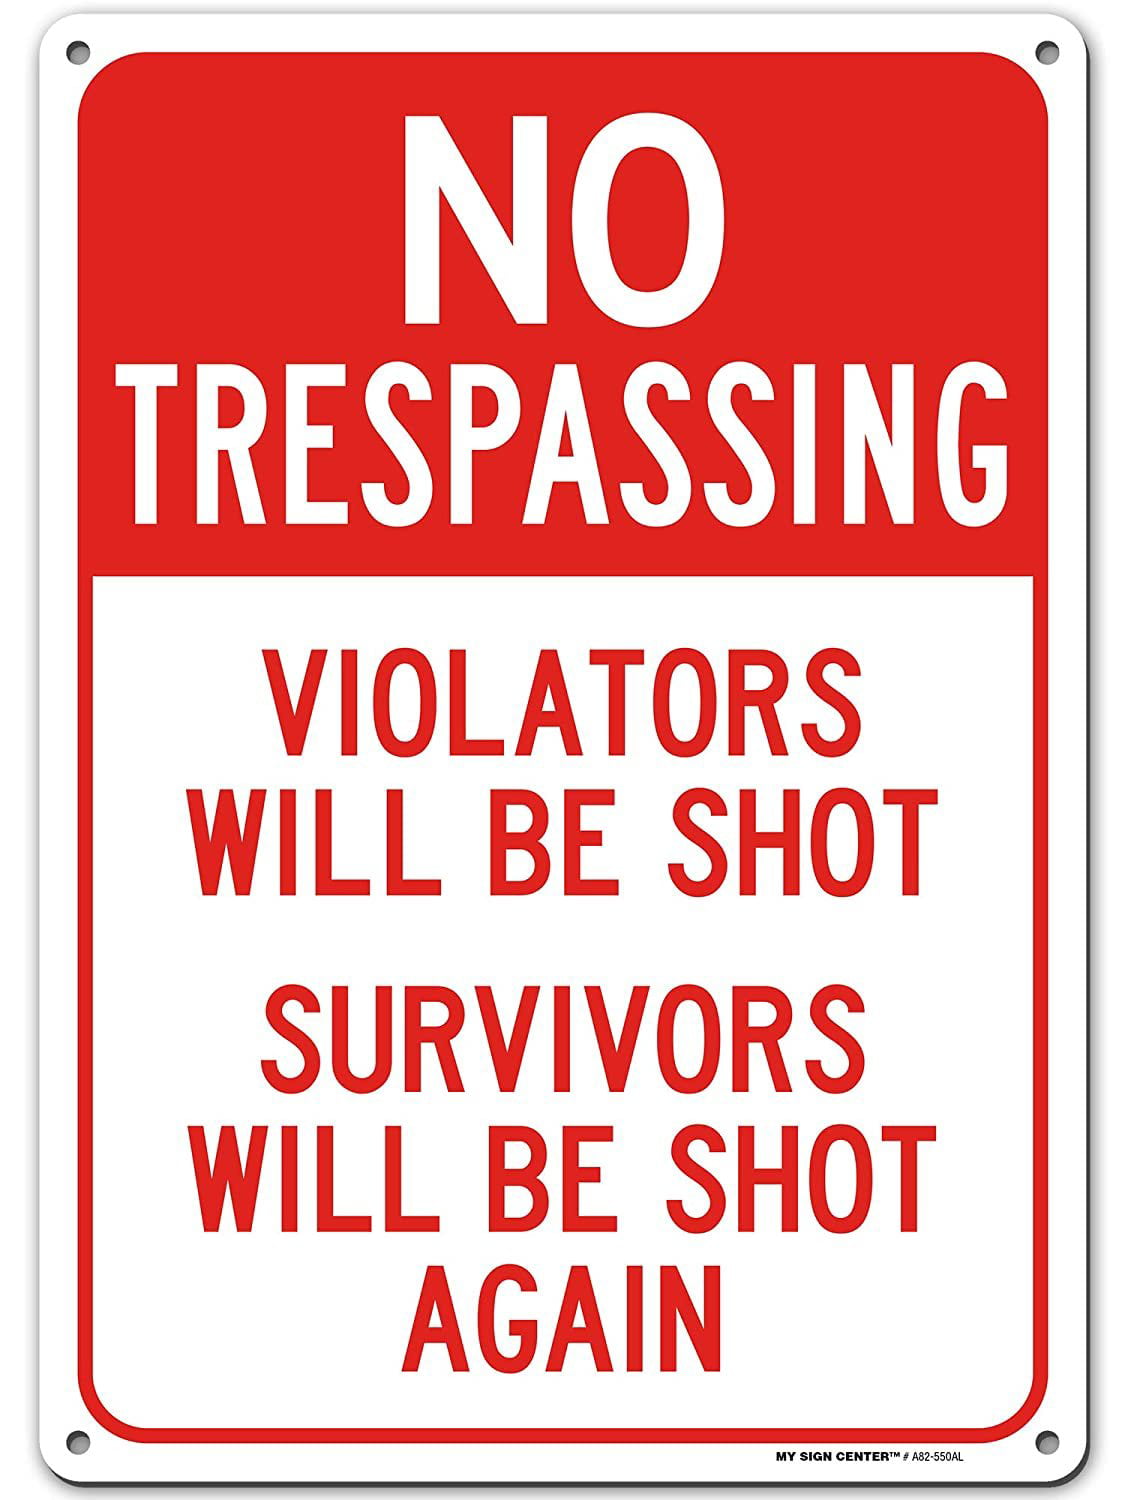 AOYEGO Violators Survivors Danger Warning Tin Sign,Violators Will be Shot Survivors be Shot Again Vintage Metal Tin Signs for Cafes Bars Pubs Shop Wall Decorative Funny Retro Signs 8x12 Inch